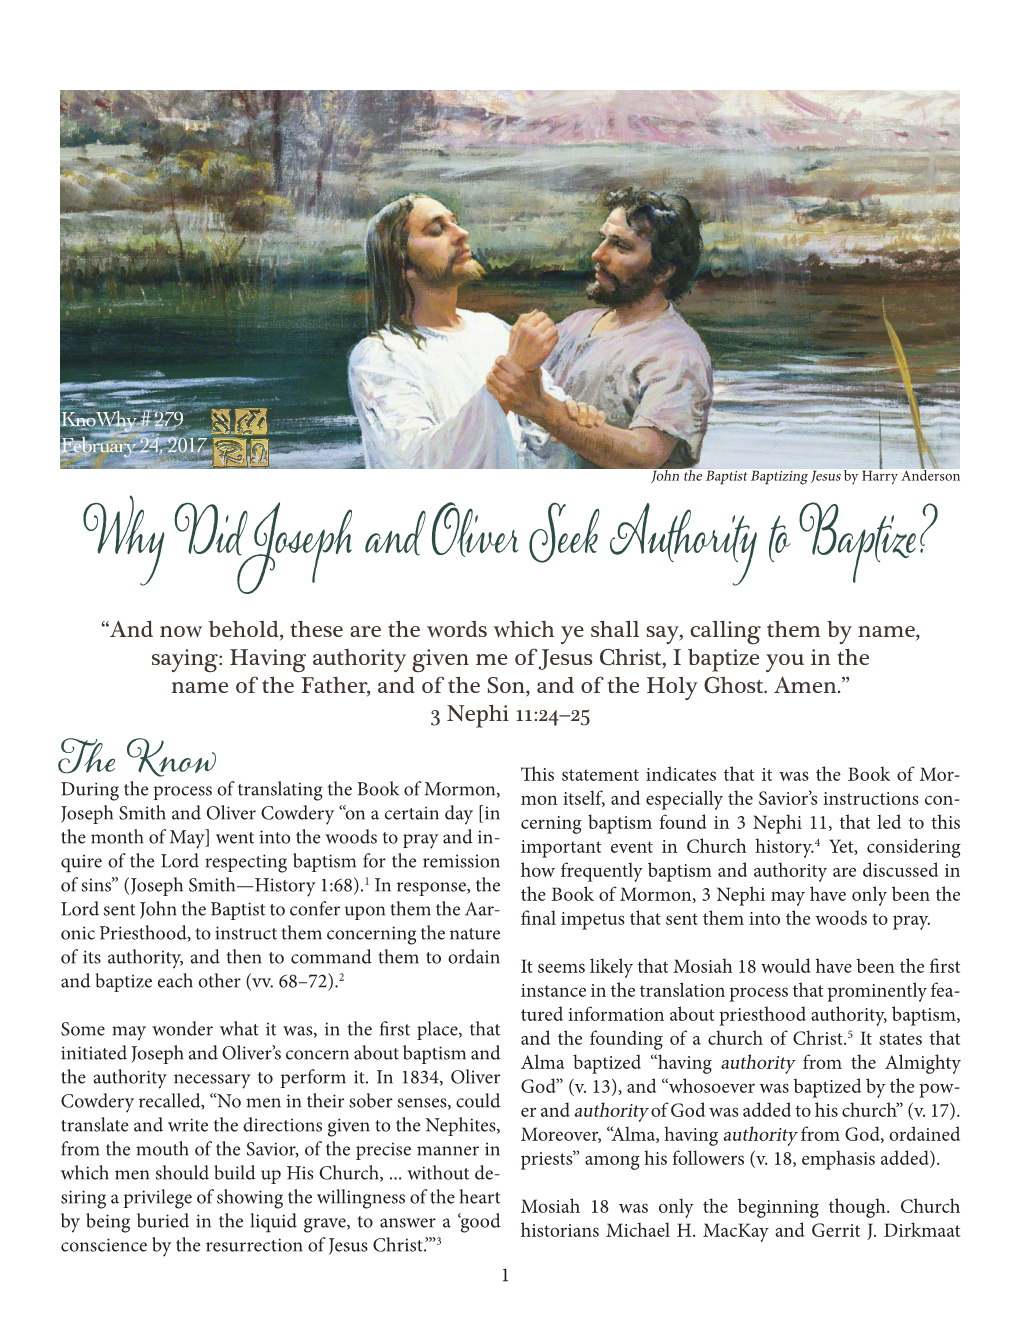 Why Did Joseph and Oliver Seek Authority to Baptize?